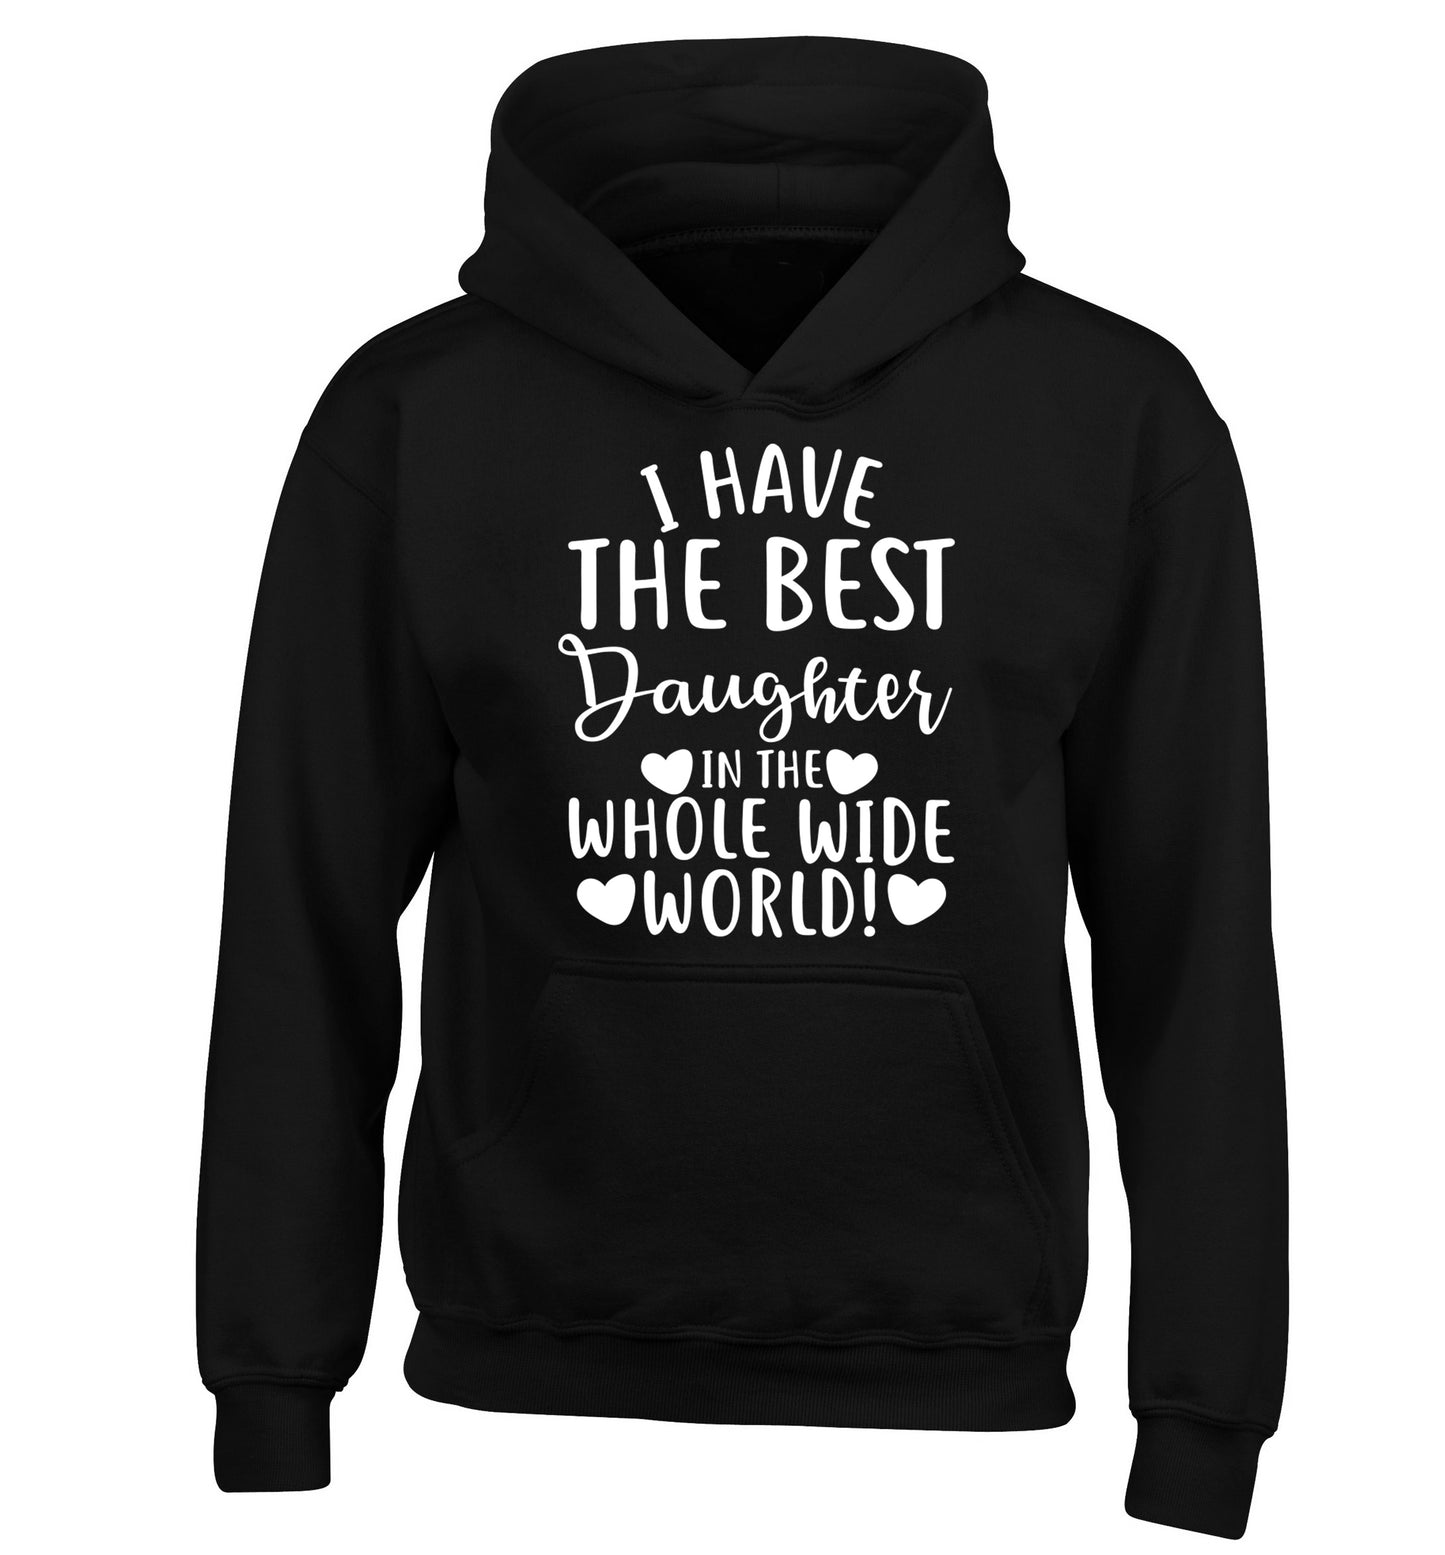 I have the best daughter in the whole wide world! children's black hoodie 12-13 Years